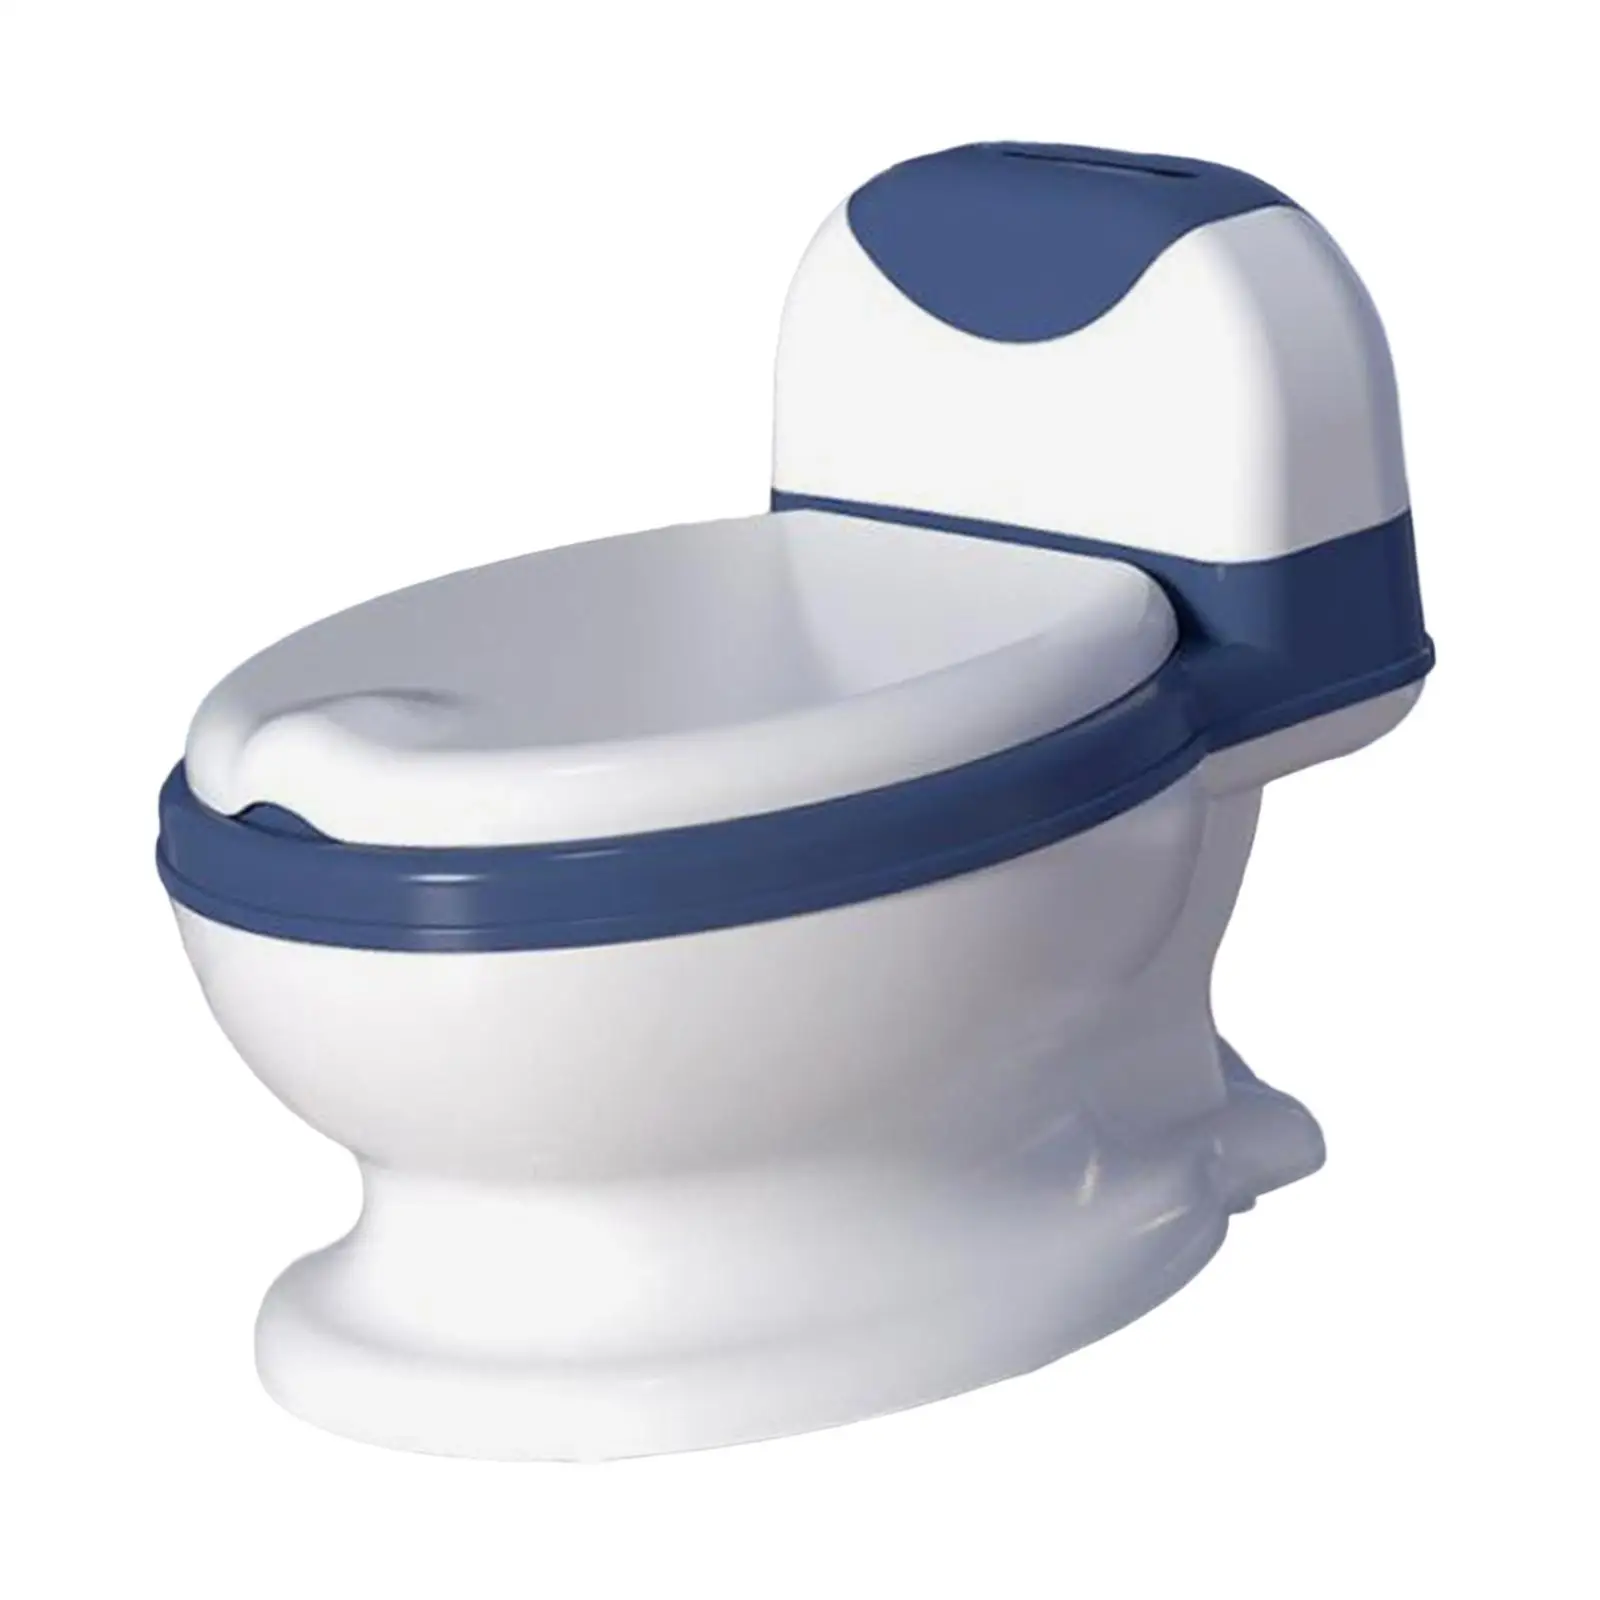 Potty Toilet Includes Cleaning Brush Comfortable Infants Toilet Seat Realistic Toilet for Travel Infants Girls Boys